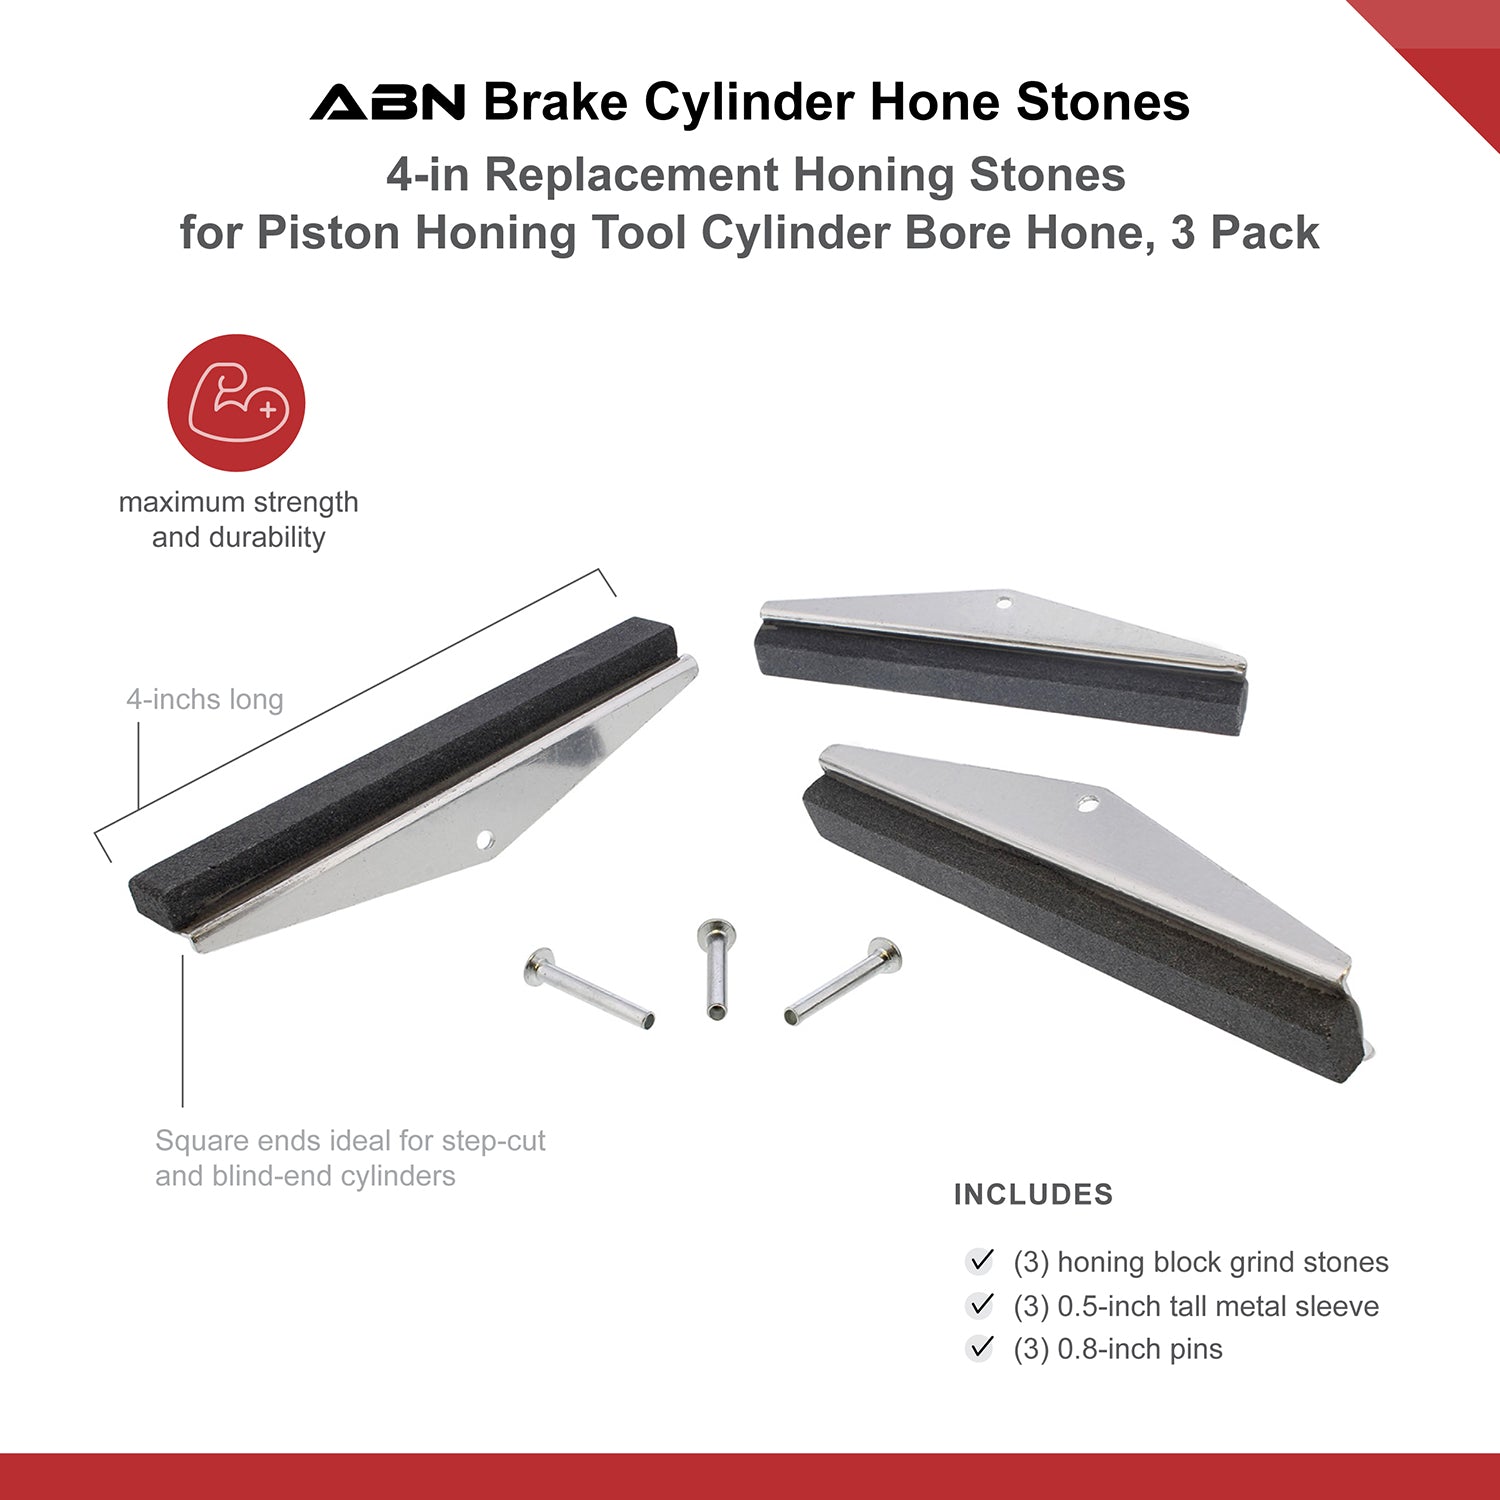 Brake Cylinder Hone Stones – 4 IN Replacement Honing Stones, 3 Pk